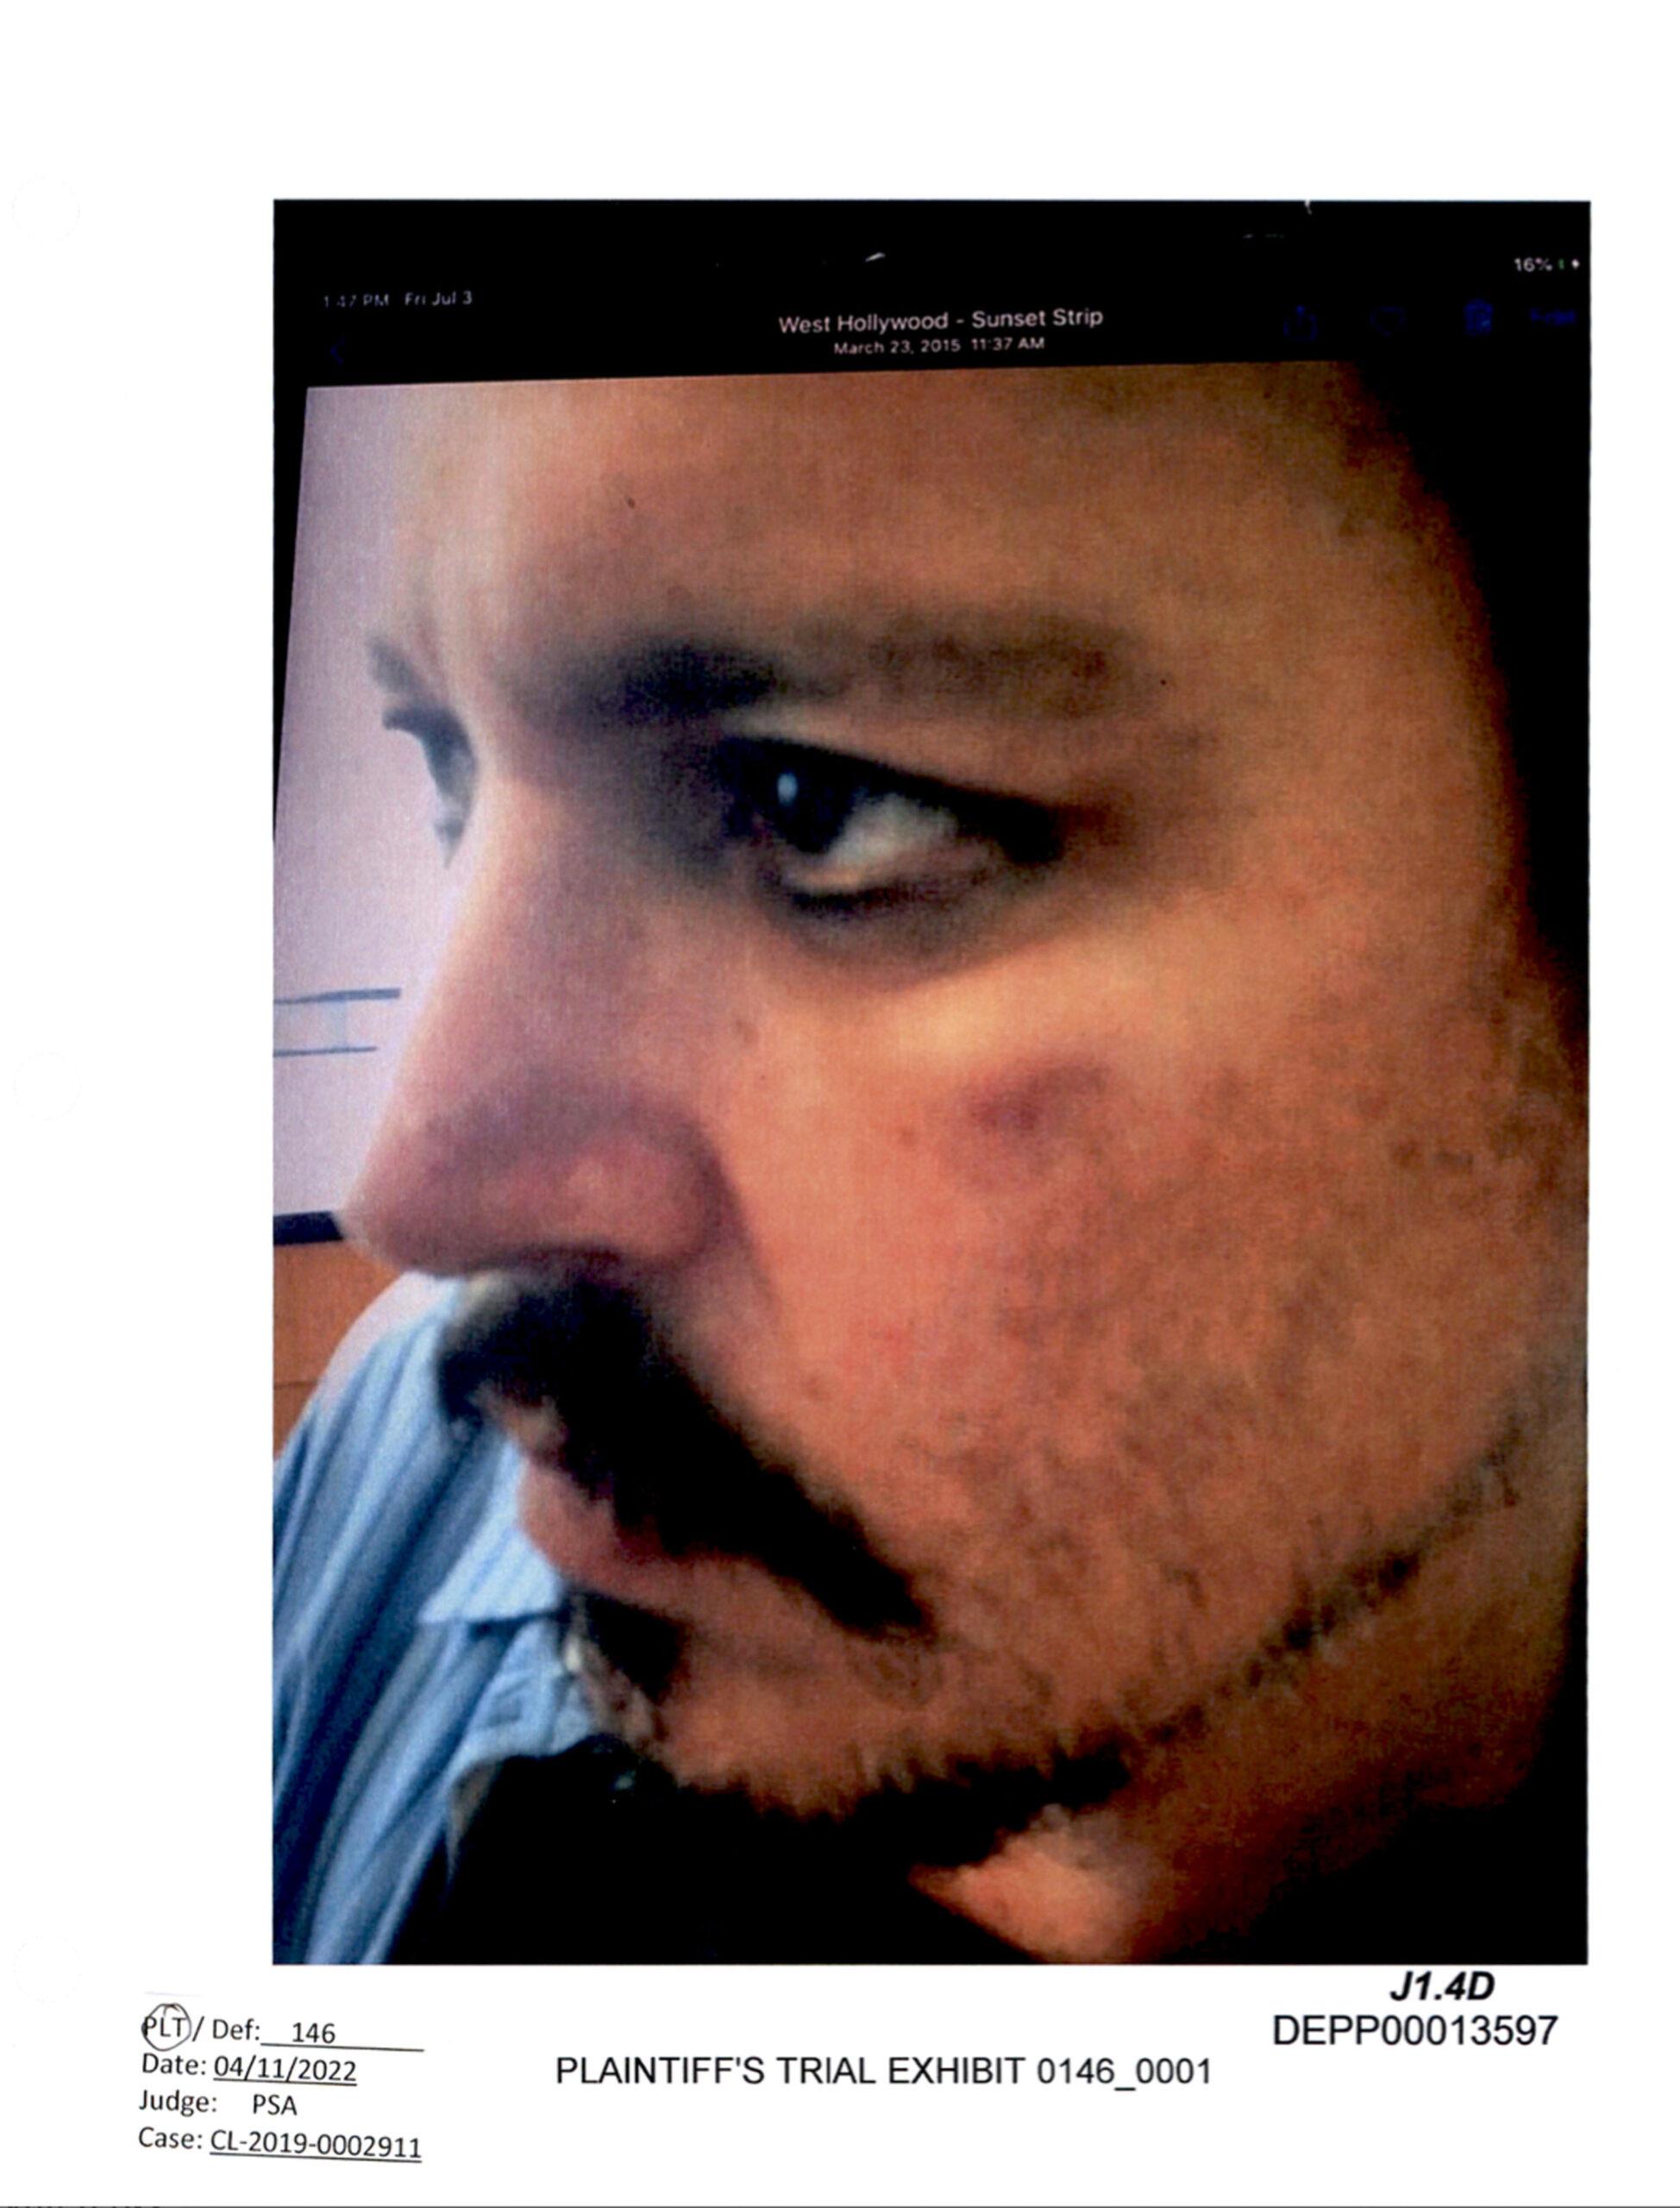 Johnny Depp appears to have bruising to his face in photos submitted as evidence in his defamation trial against ex-wife Amber Heard